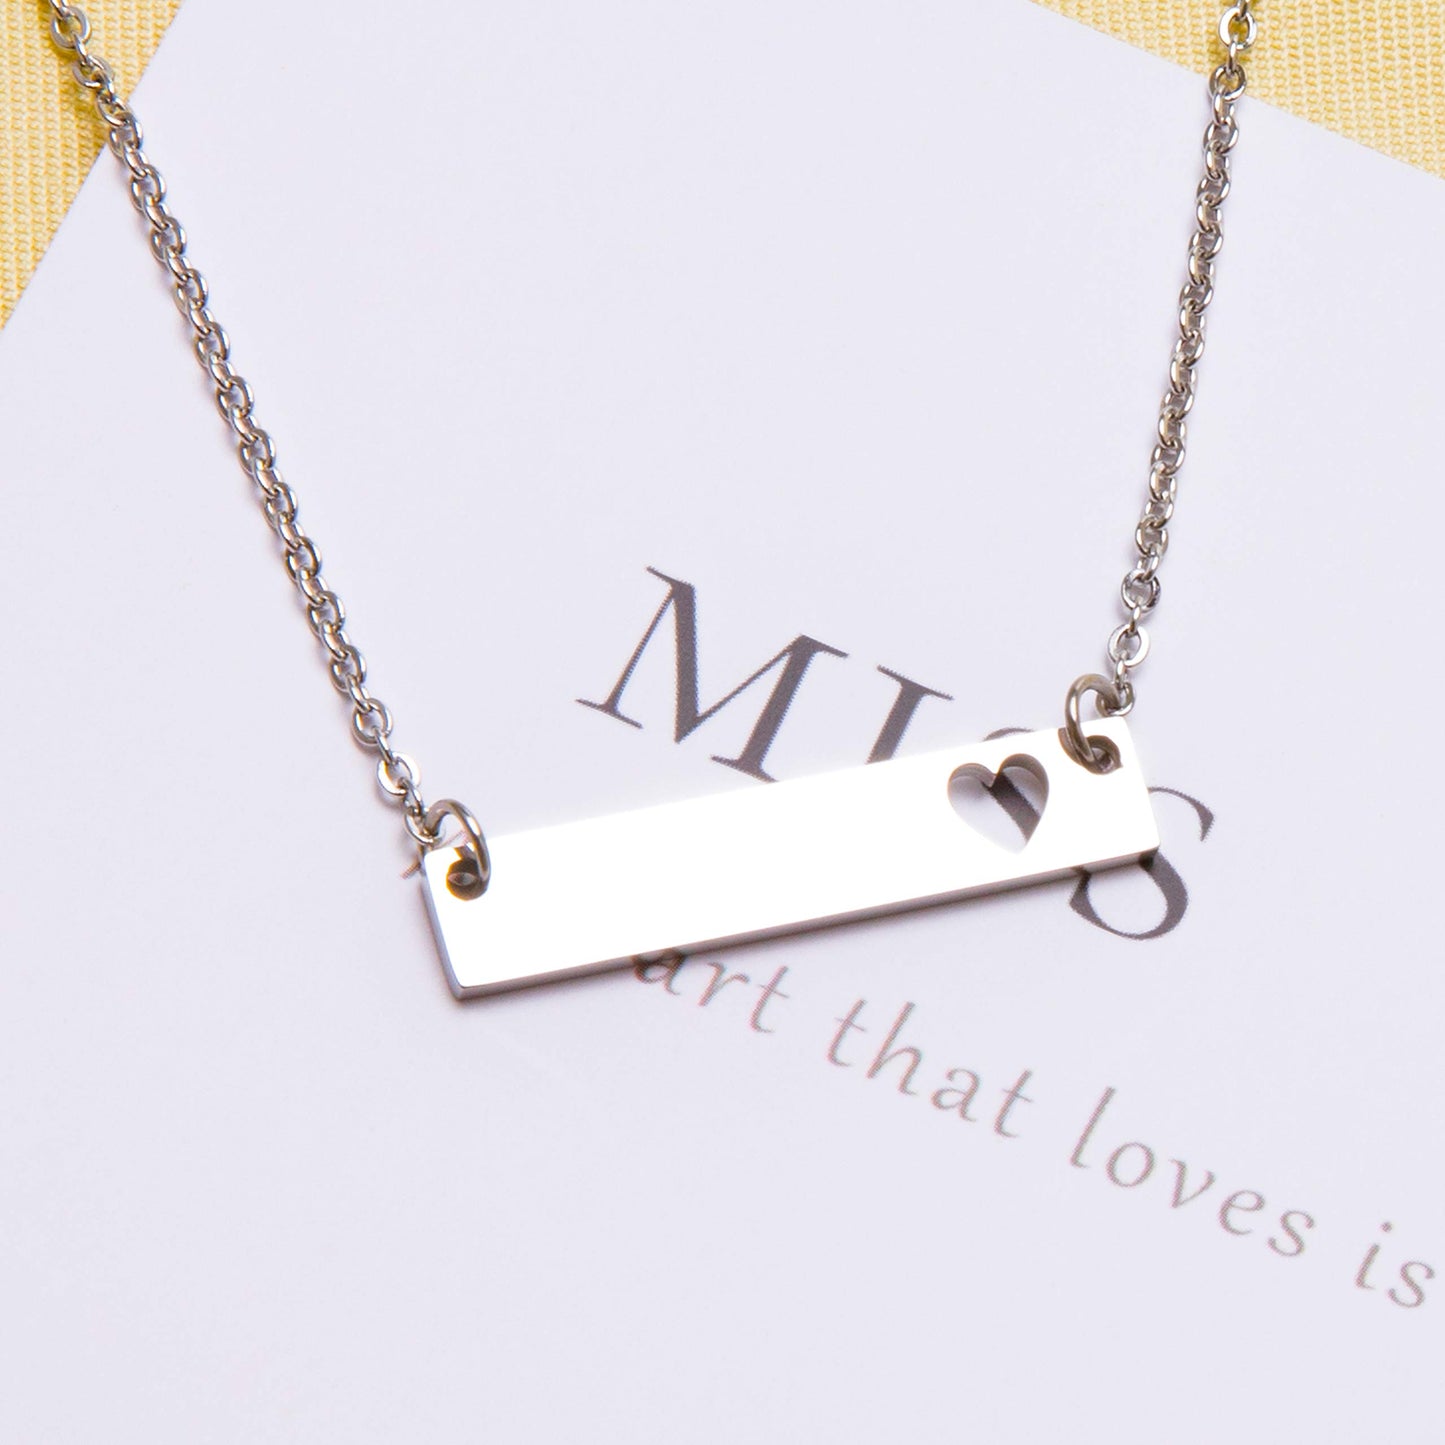 Fanery sue Personalized Custom Heart Necklaces Set Engraved Name Message Bar Pendant Love Gift for Mother Daughter Couples